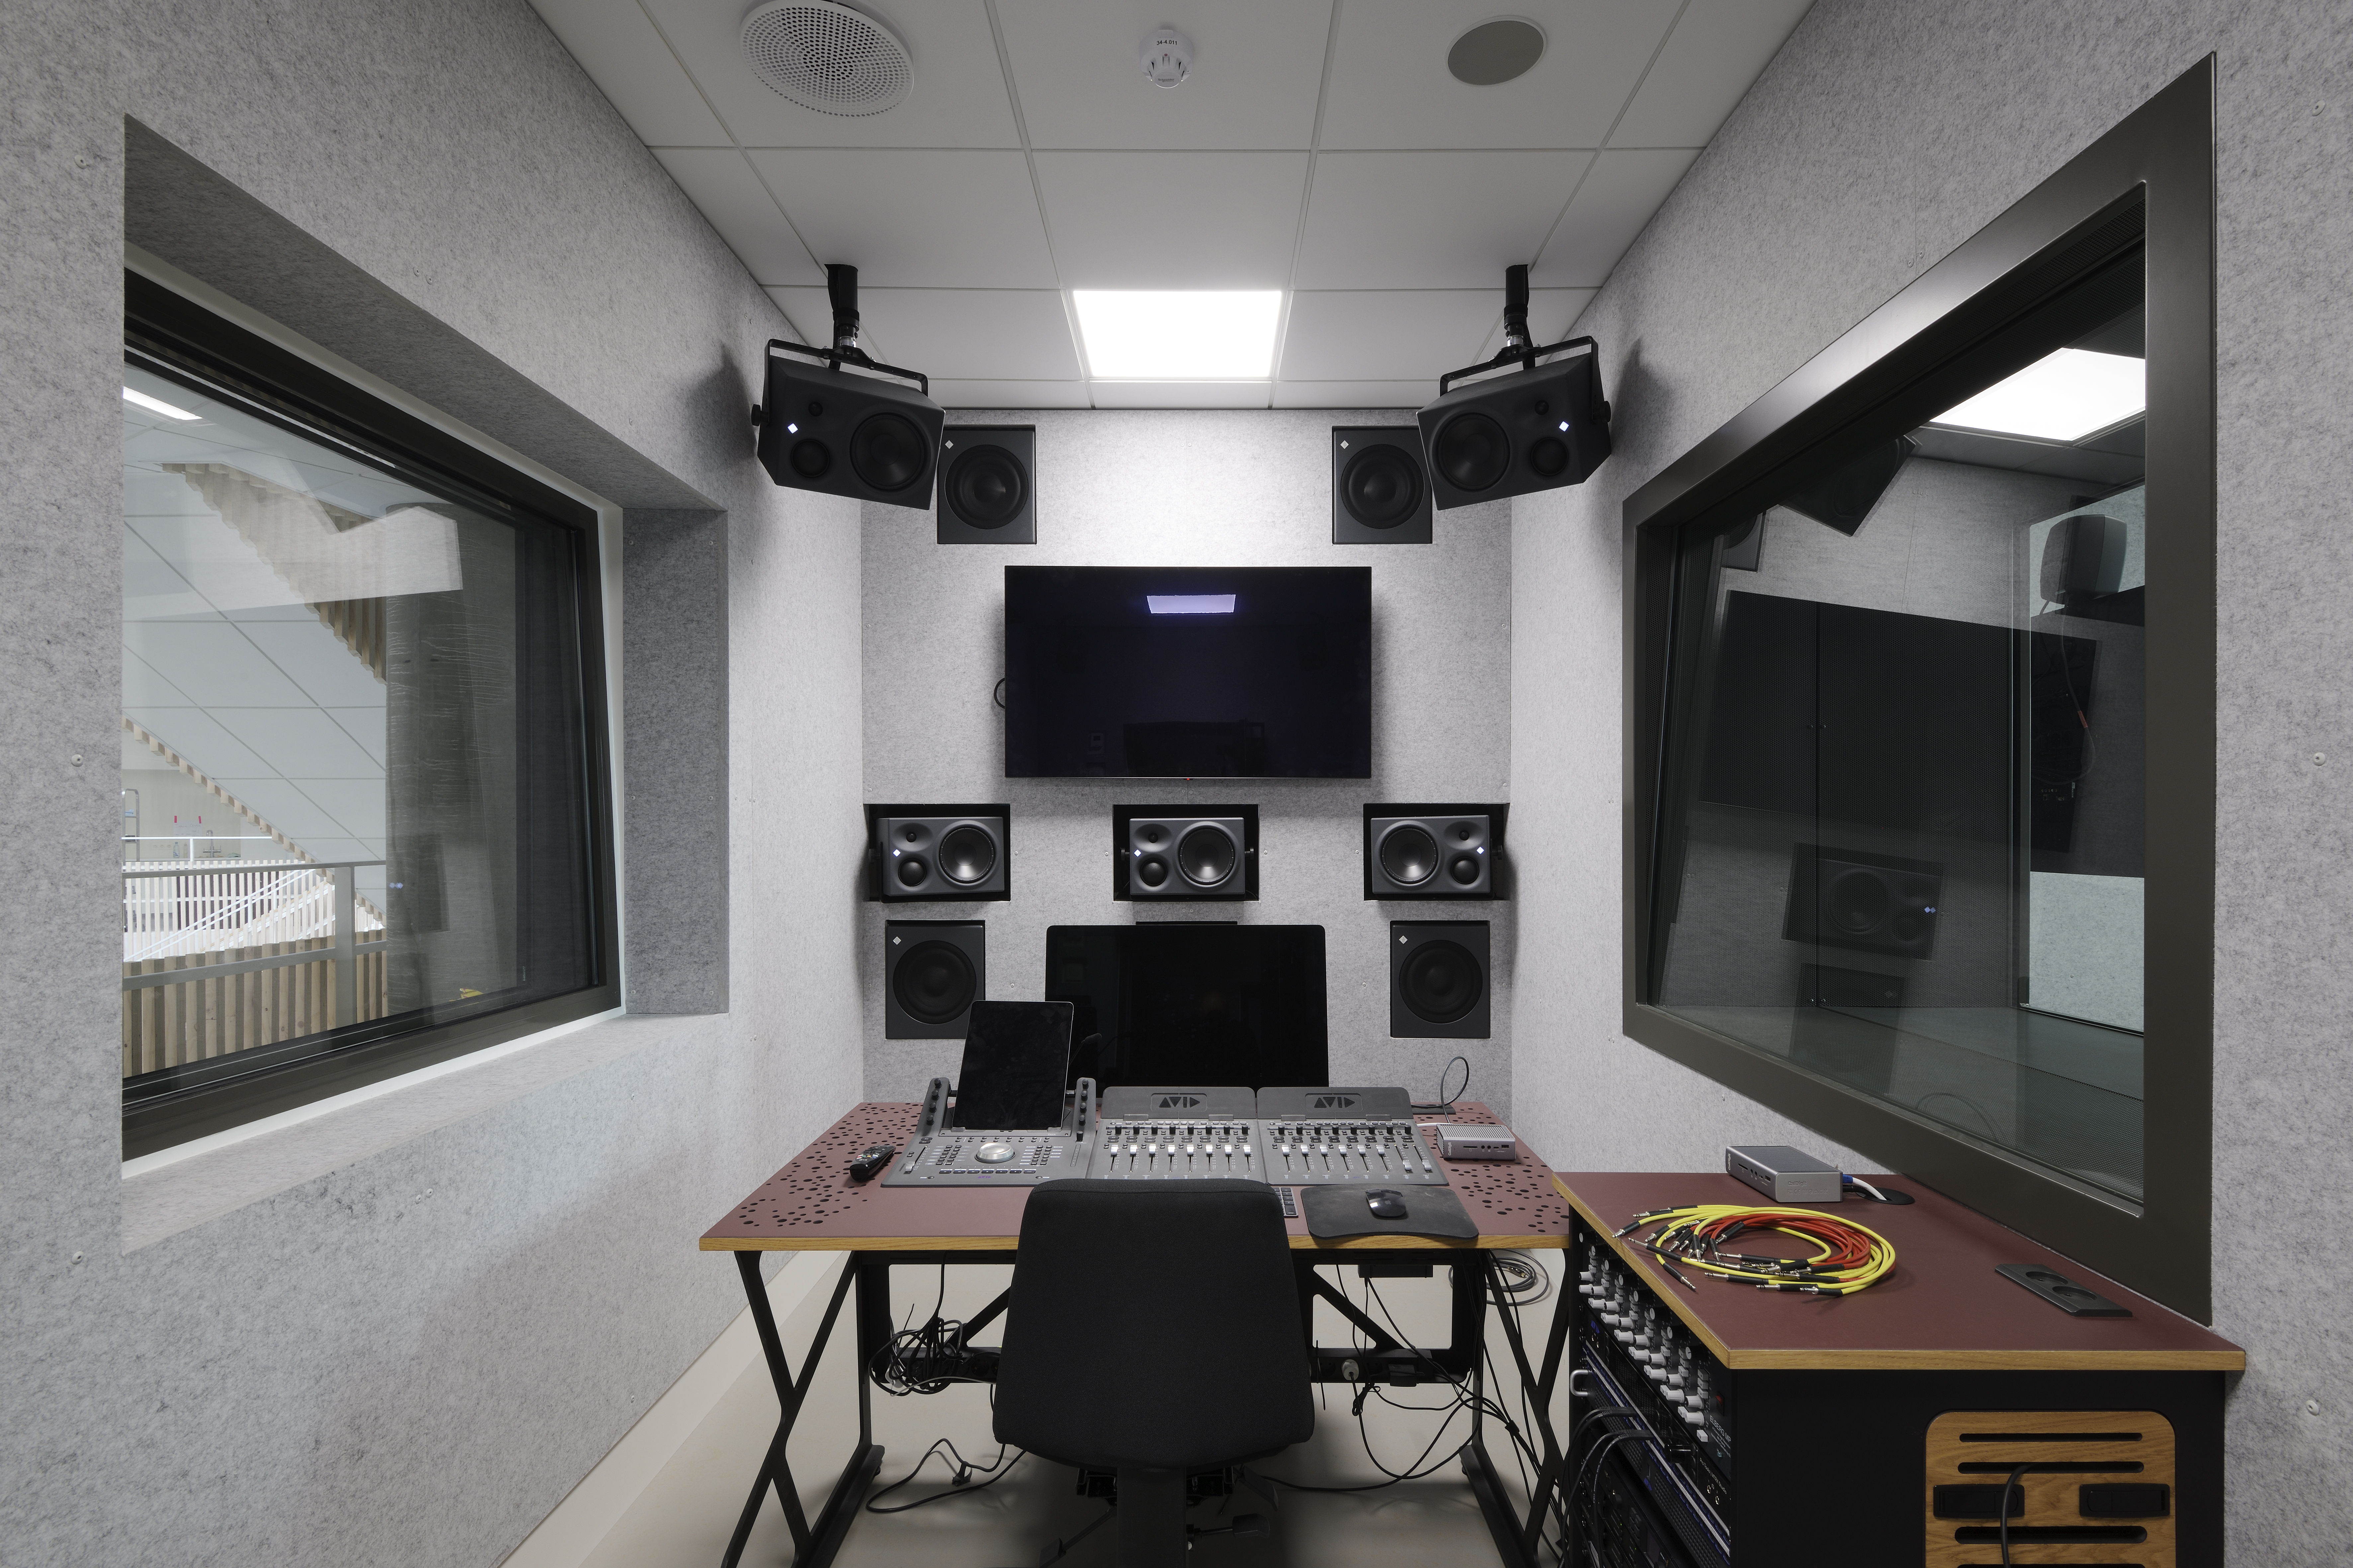 The Foley studio is fitted with Neumann monitors